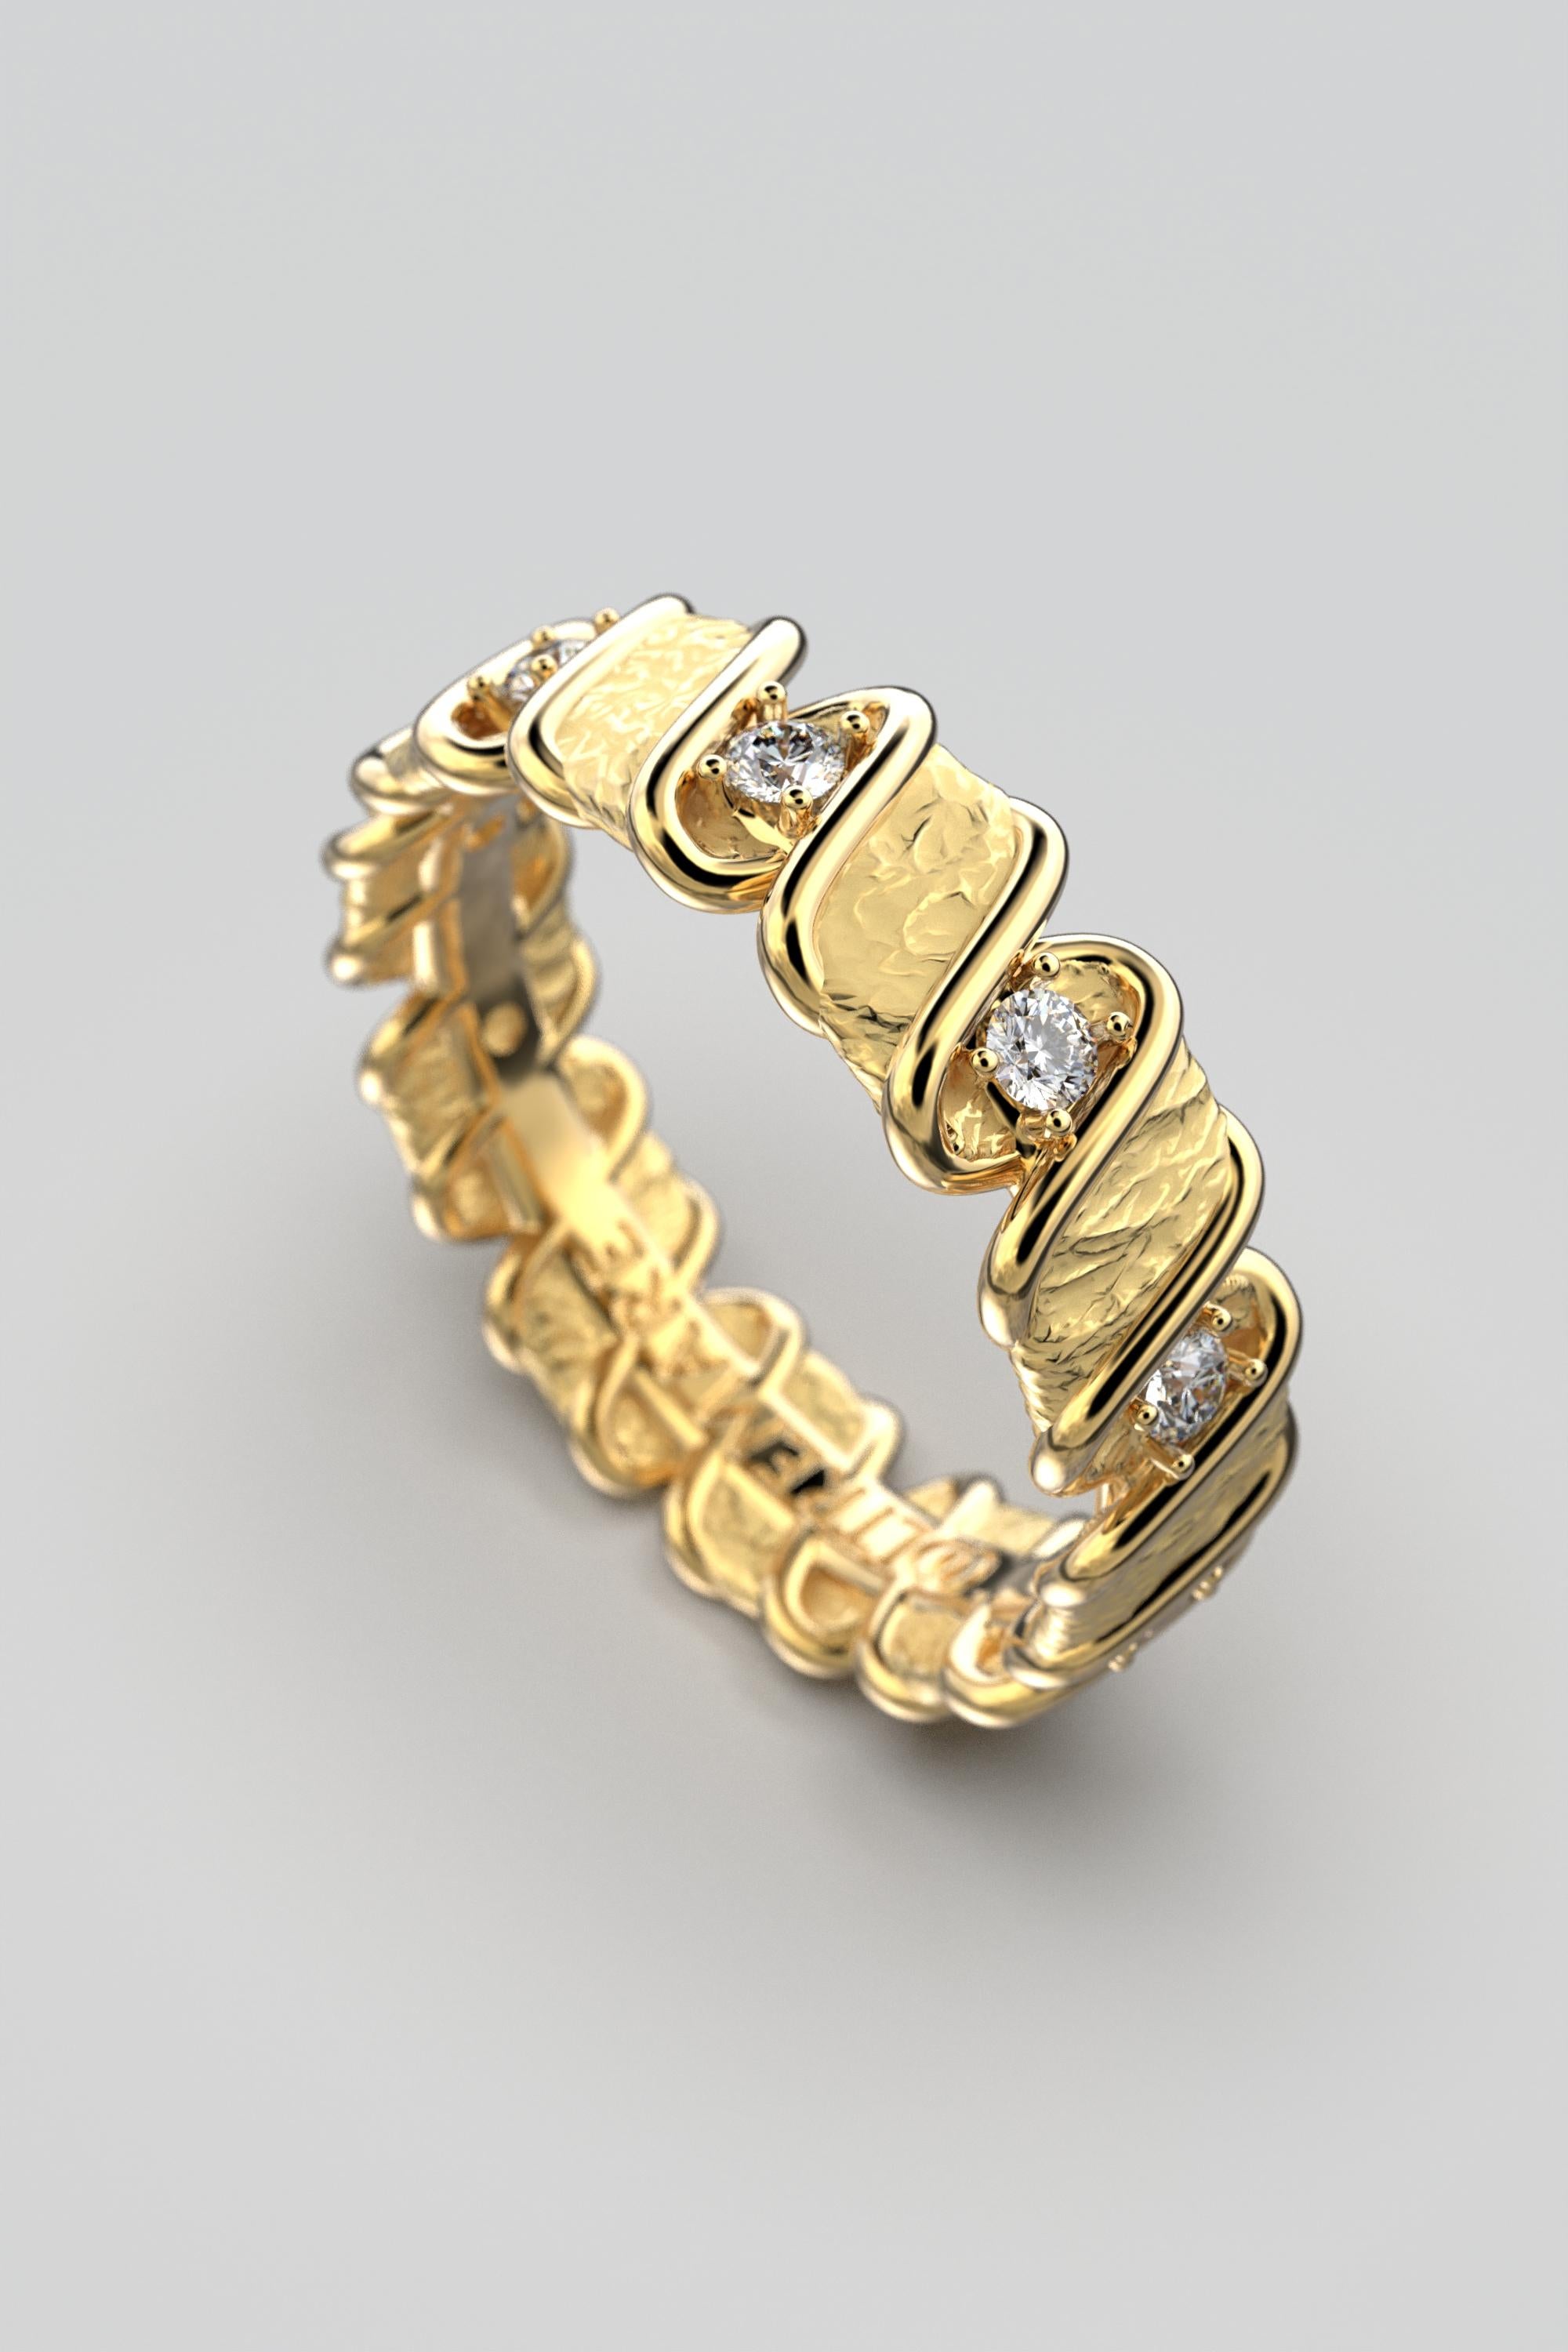 For Sale:  14k Italian Gold Eternity Band with Natural Diamonds  Oltremare Gioielli 9